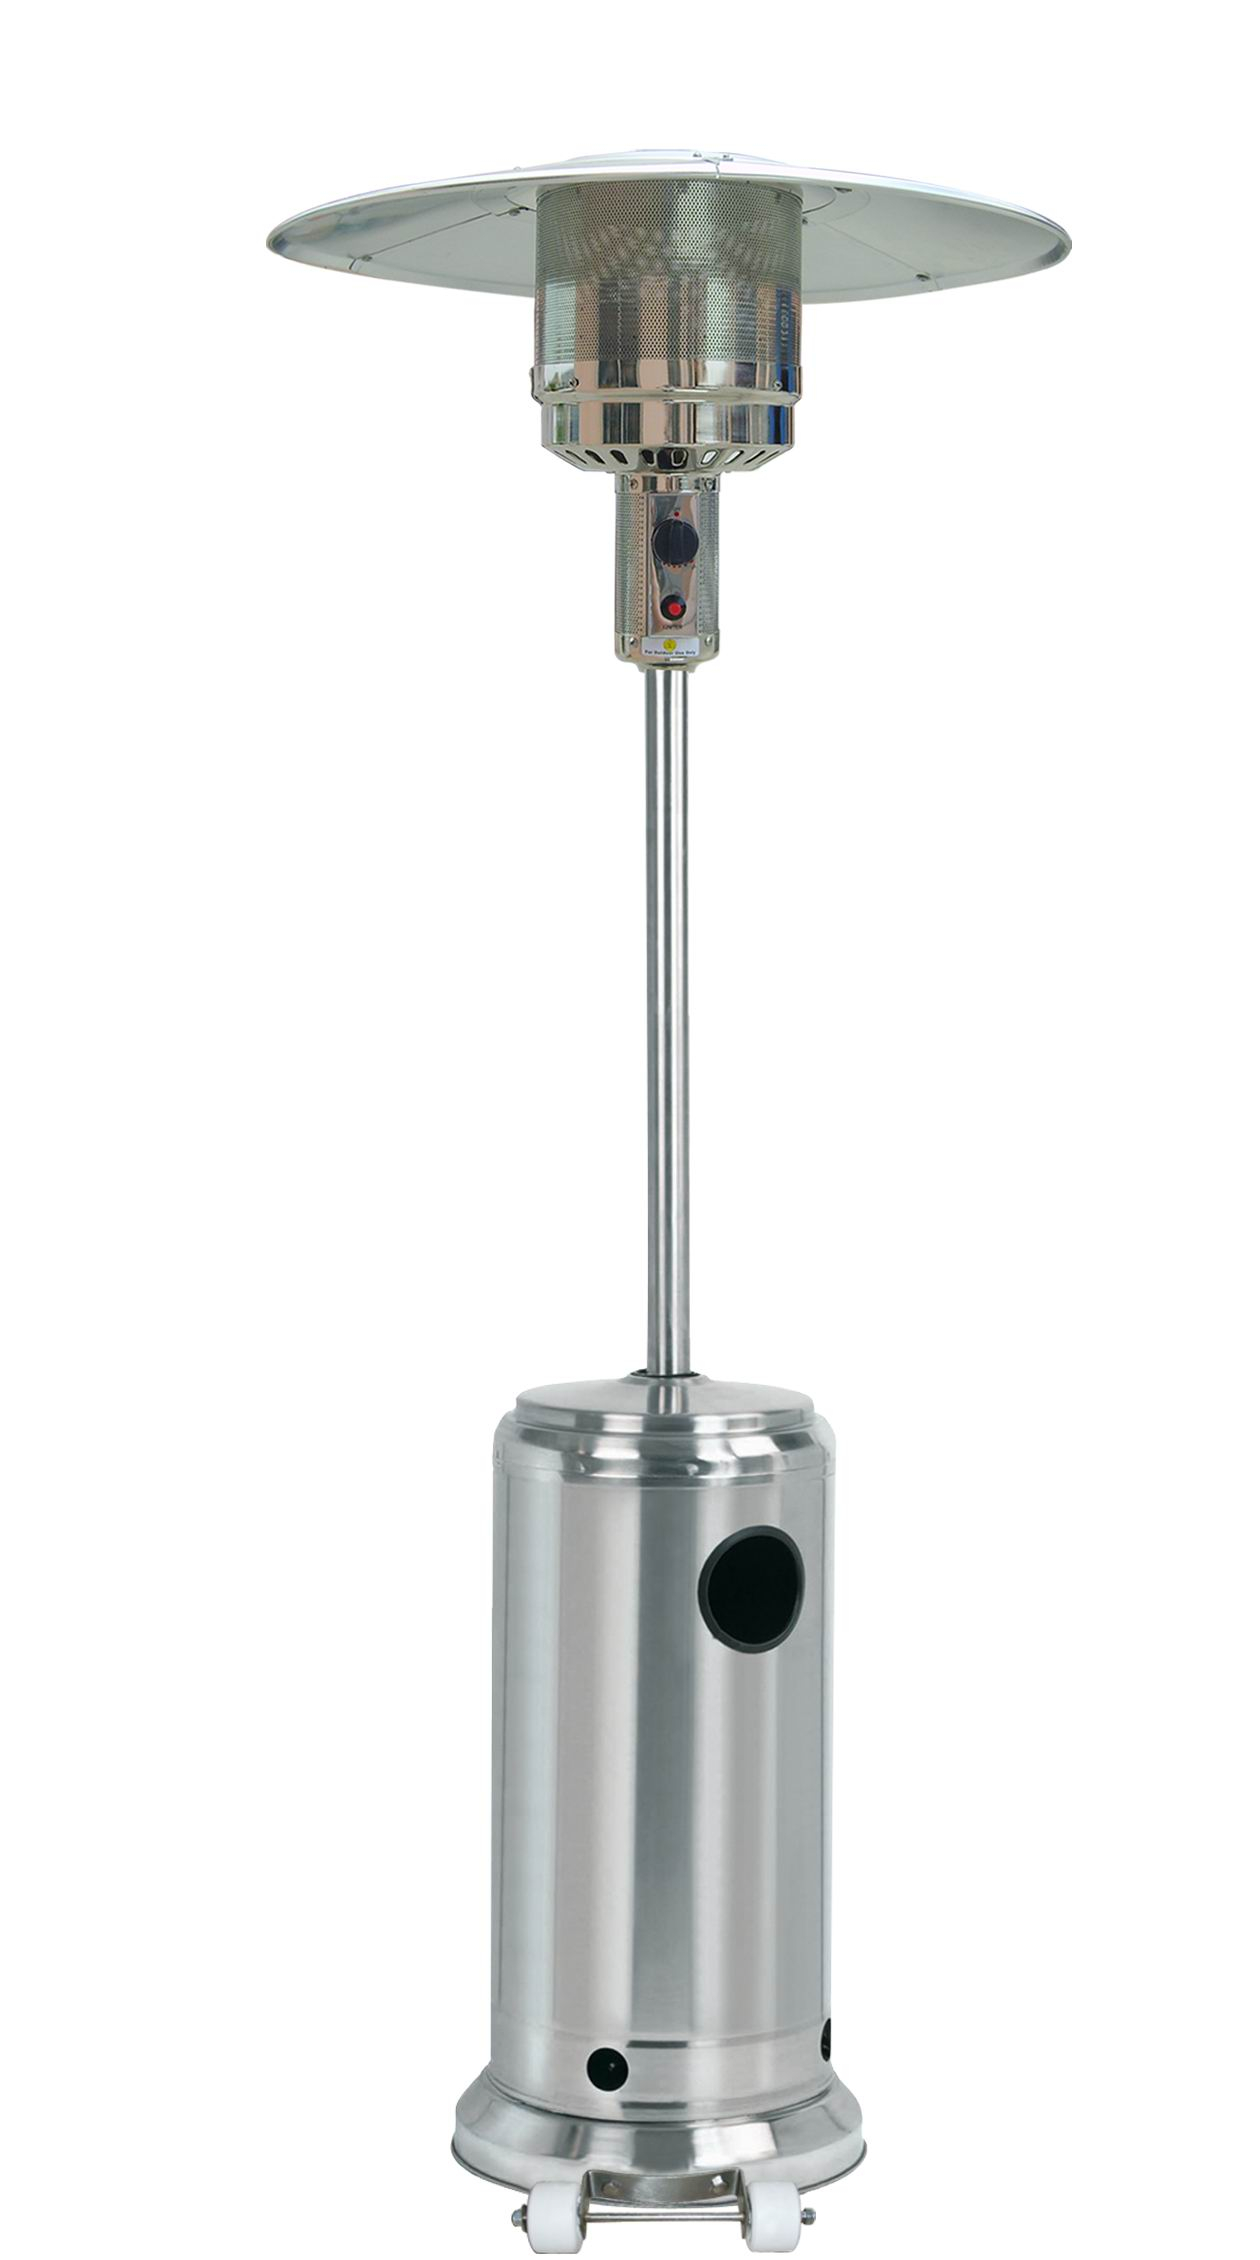 Details About Palm Springs Garden Gas Outdoor 13kw Patio Heater Stainless Steel intended for proportions 1260 X 2260